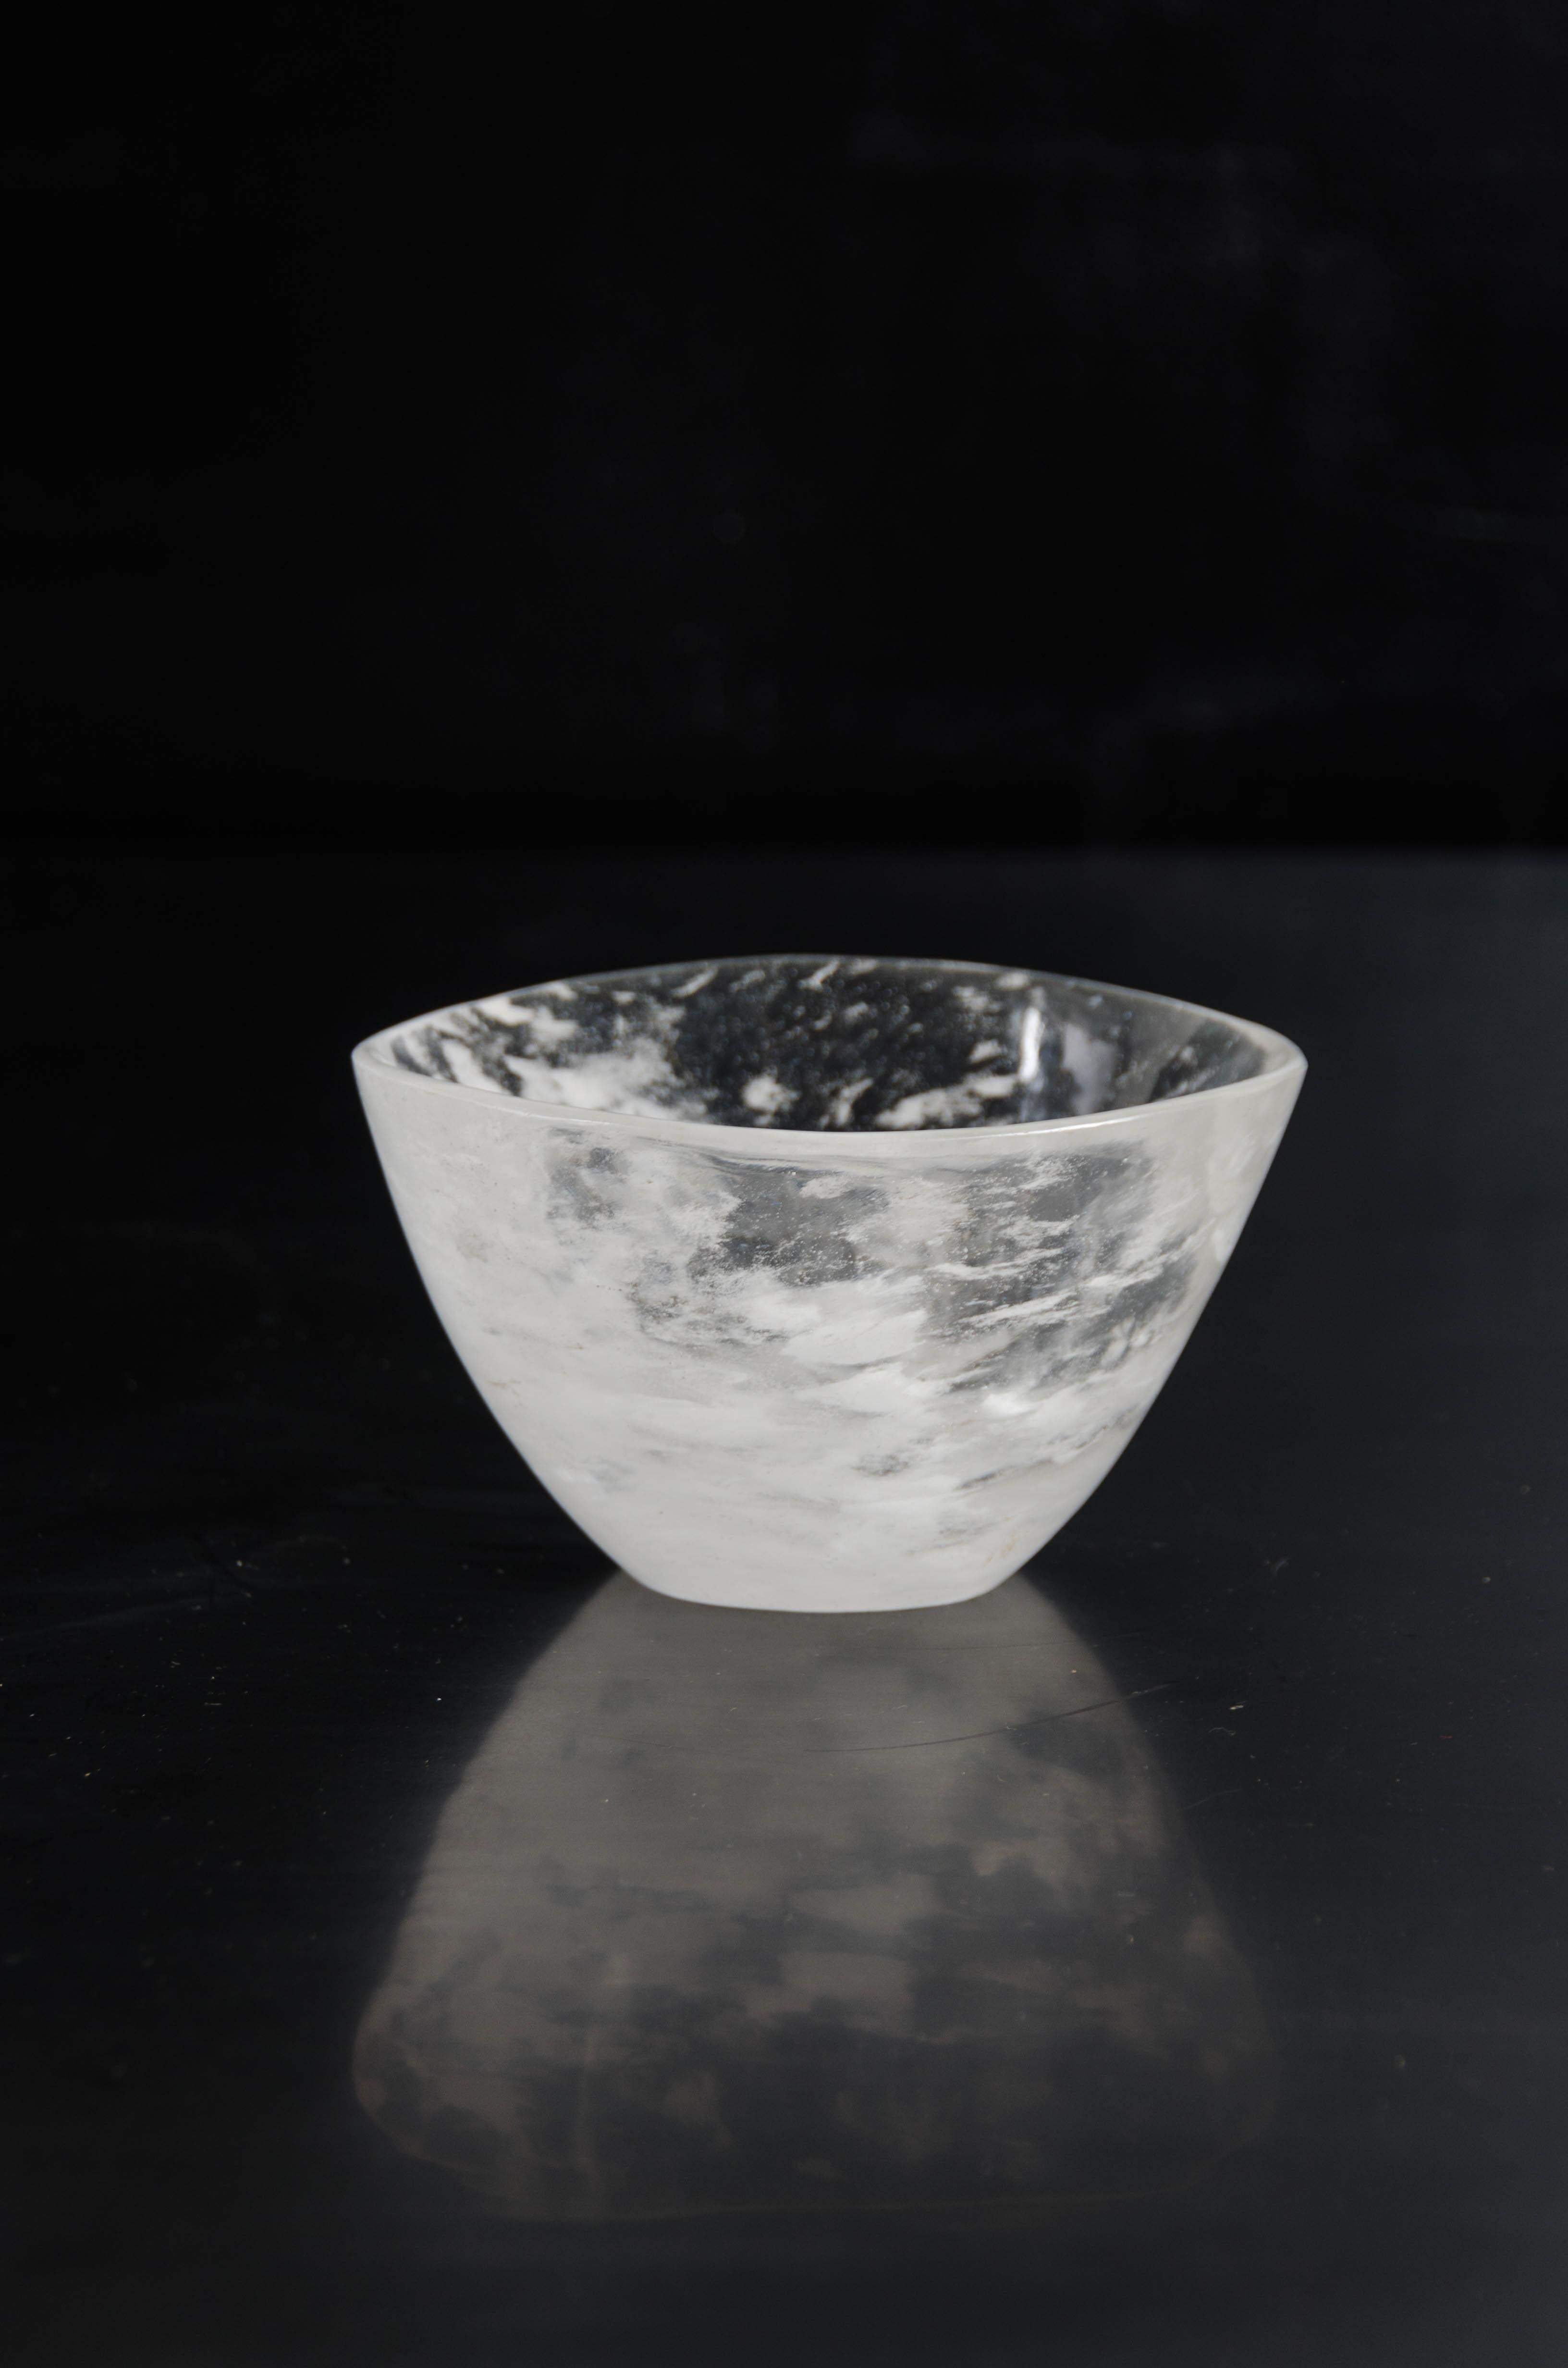 Ghen bowl
Crystal
Hand carved
Crystal inclusions vary
Limited edition
Contemporary.